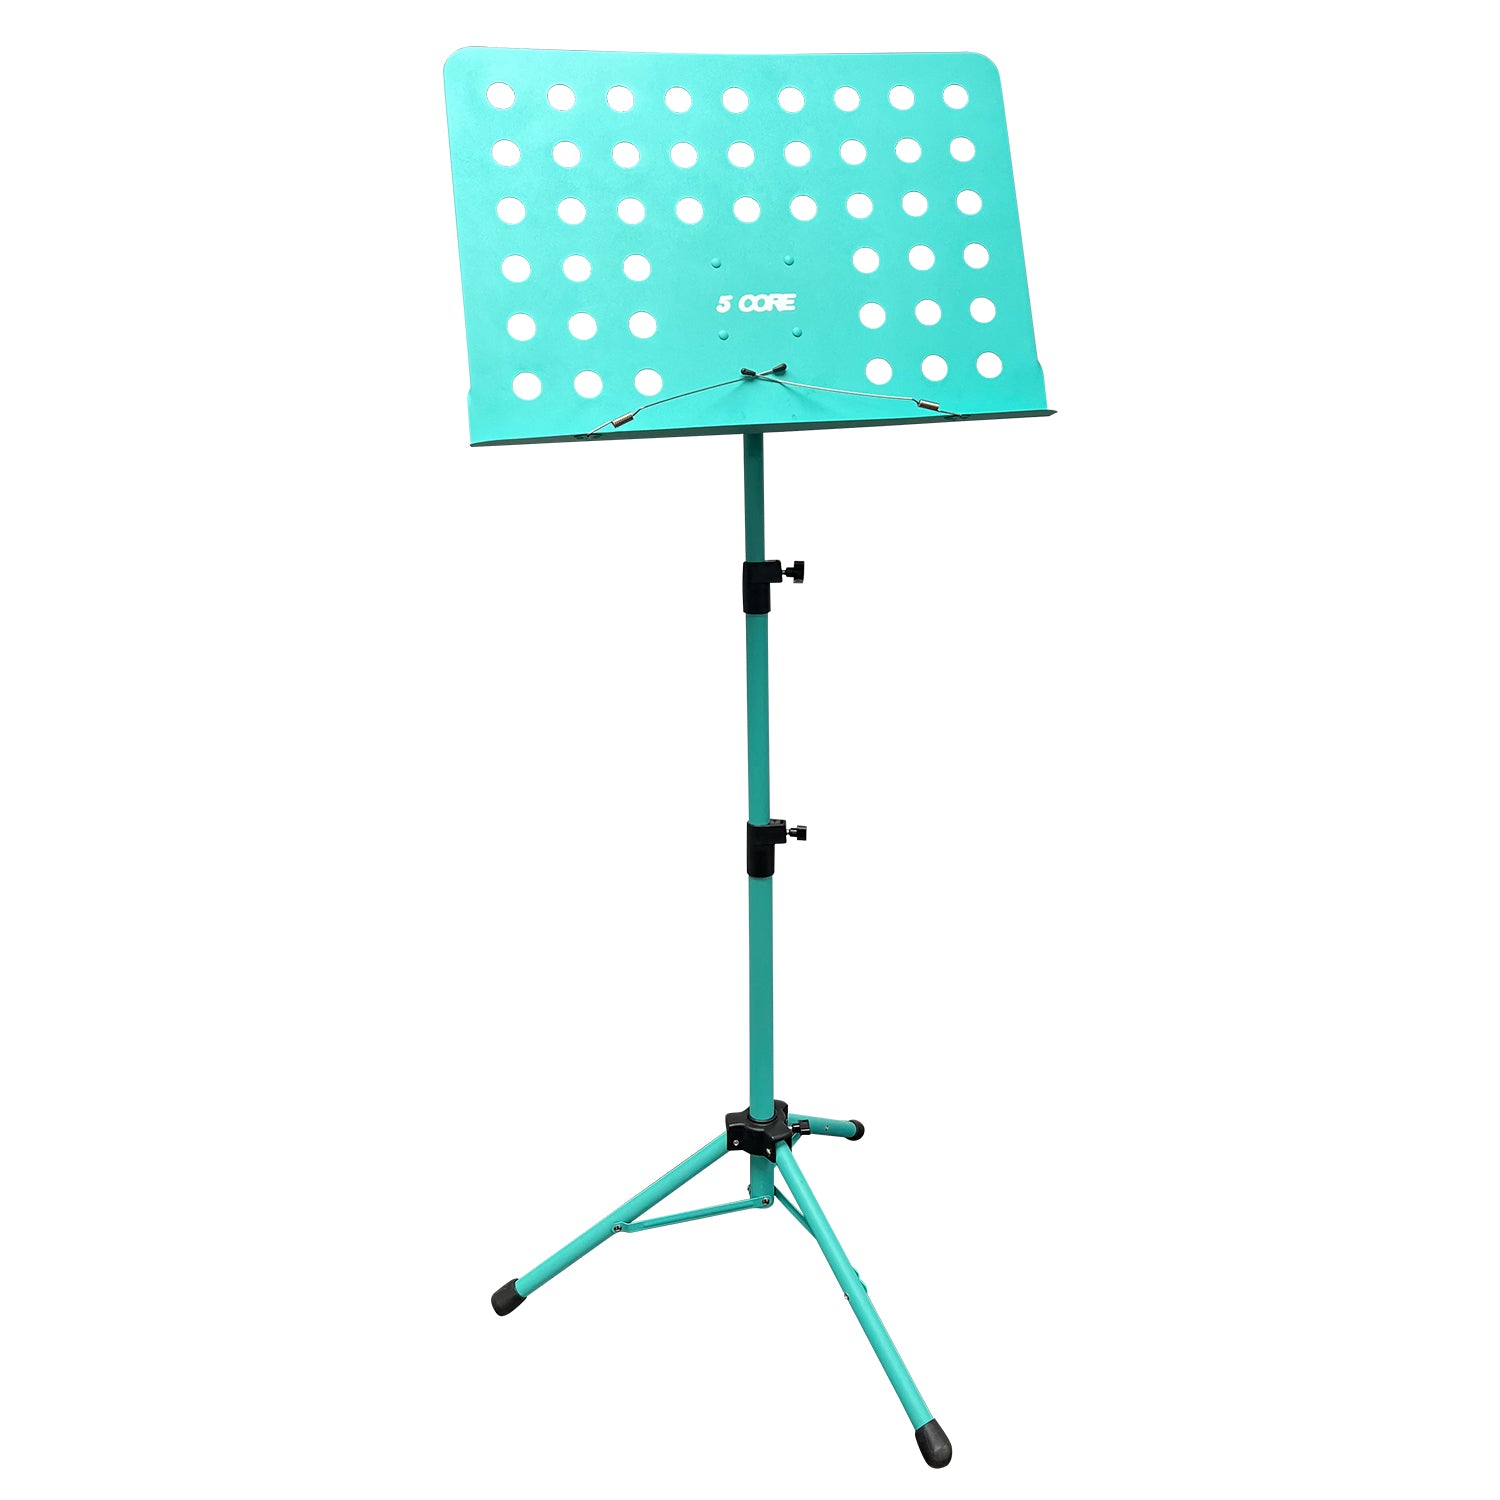 5 Core Music Stand for Sheet Music Blue Folding Portable Stands Light Weight Book Clip Holder Music Accessories - MUS BLU